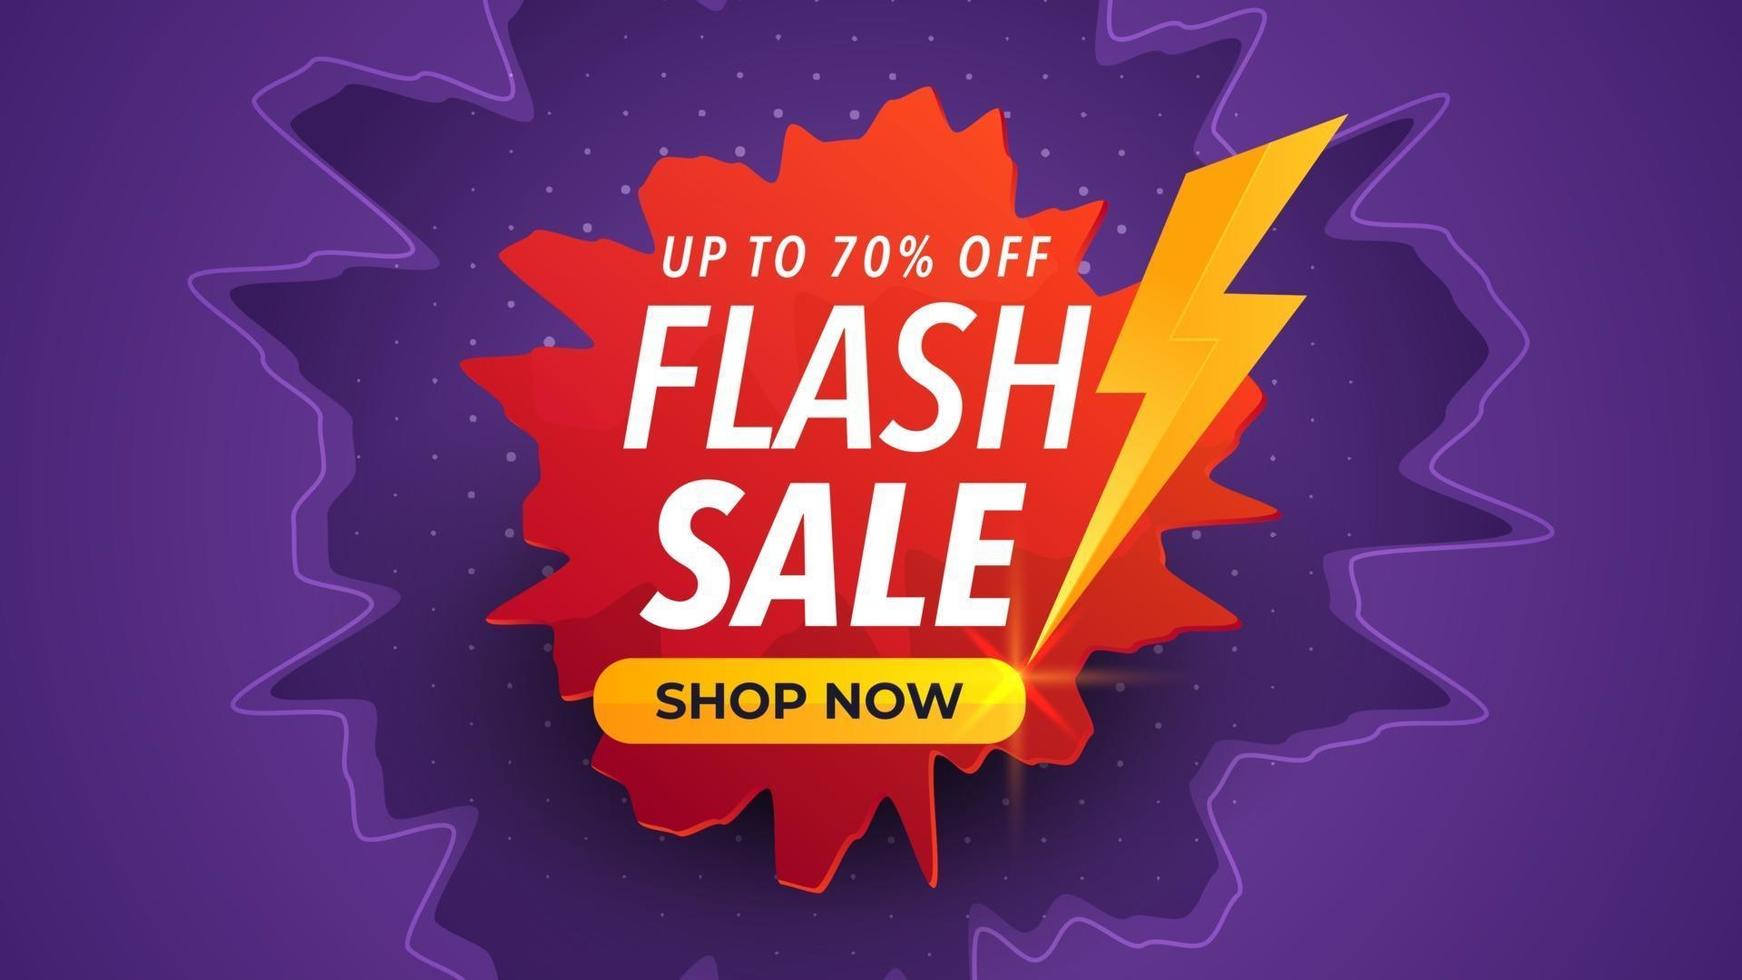 Flash sale banner with cracks or shocks effect. Purple background with red gradient colors. Business product ads promotion template. vector